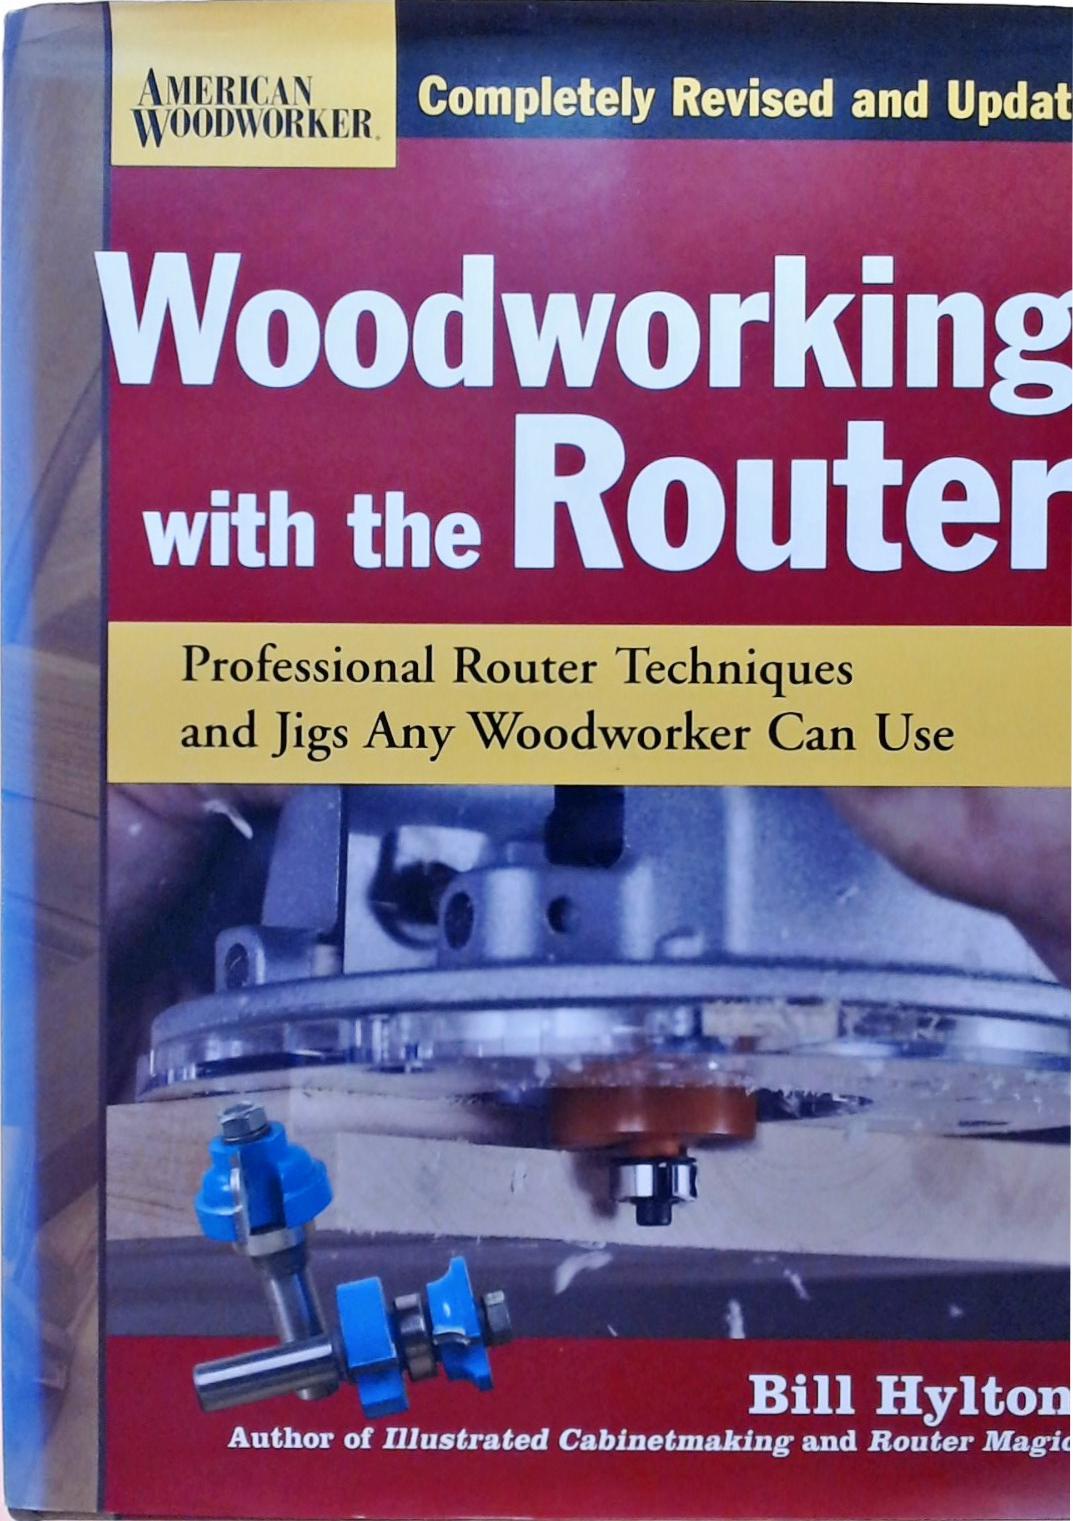 Woodworking with the Router